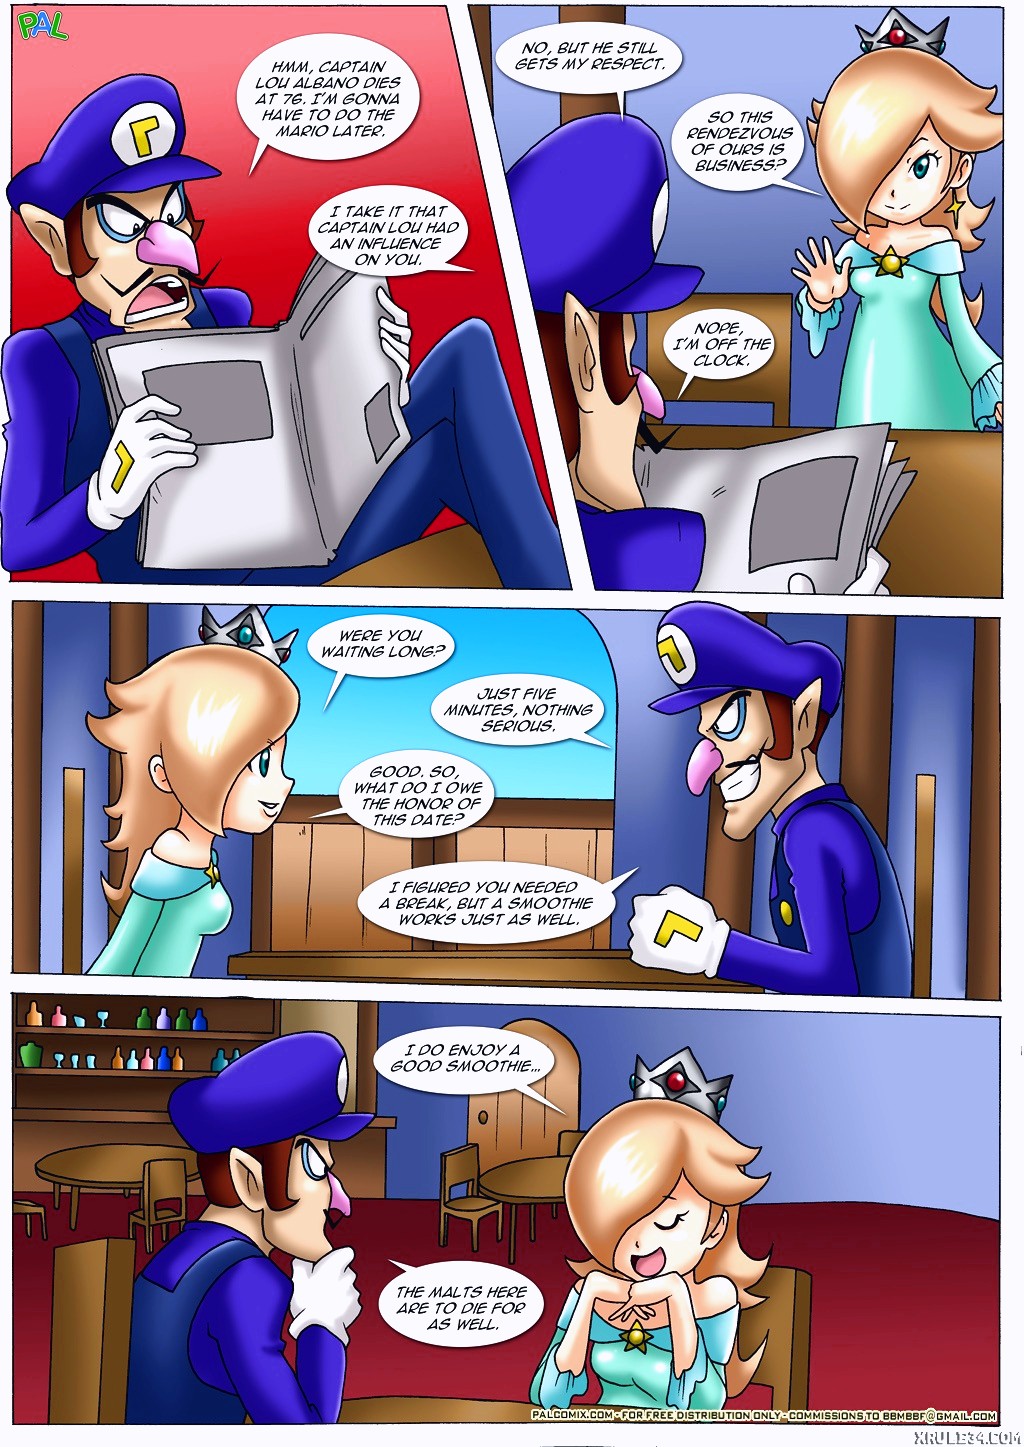 Mario Project 2 page 23